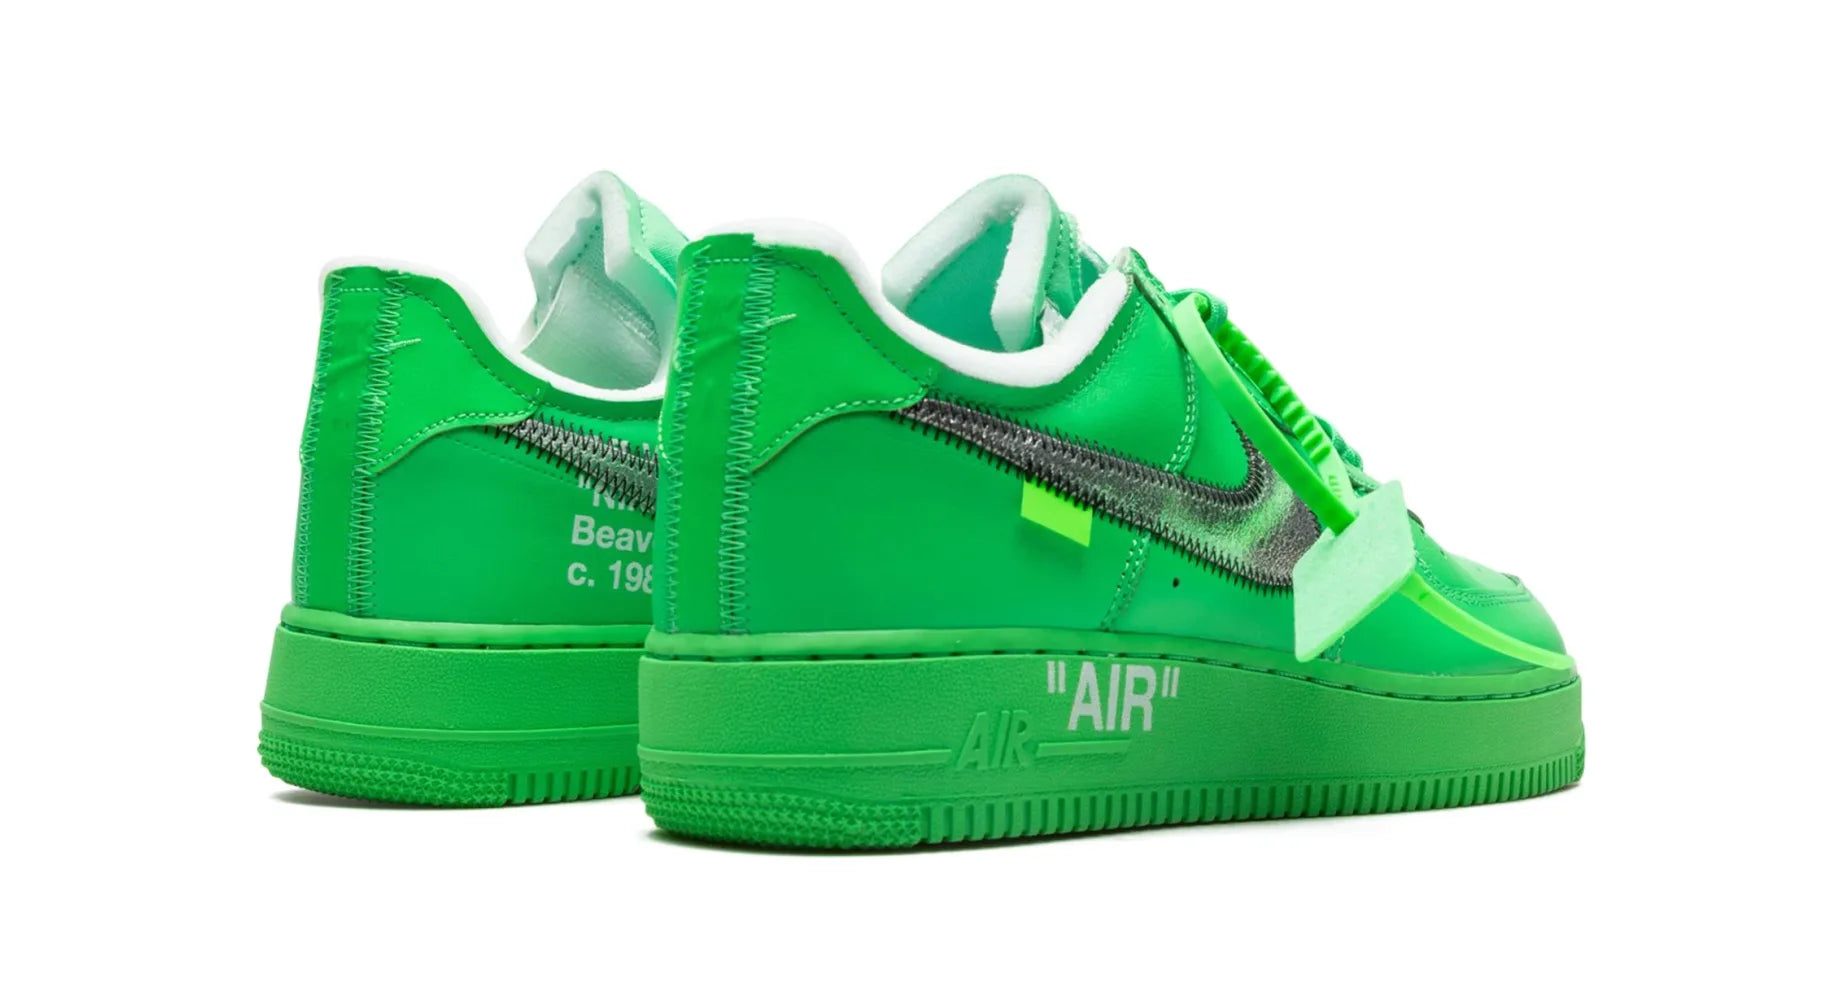 Nike Air Force 1 Low Off-White Brooklyn 7.5M/9W (Pre-Owned)